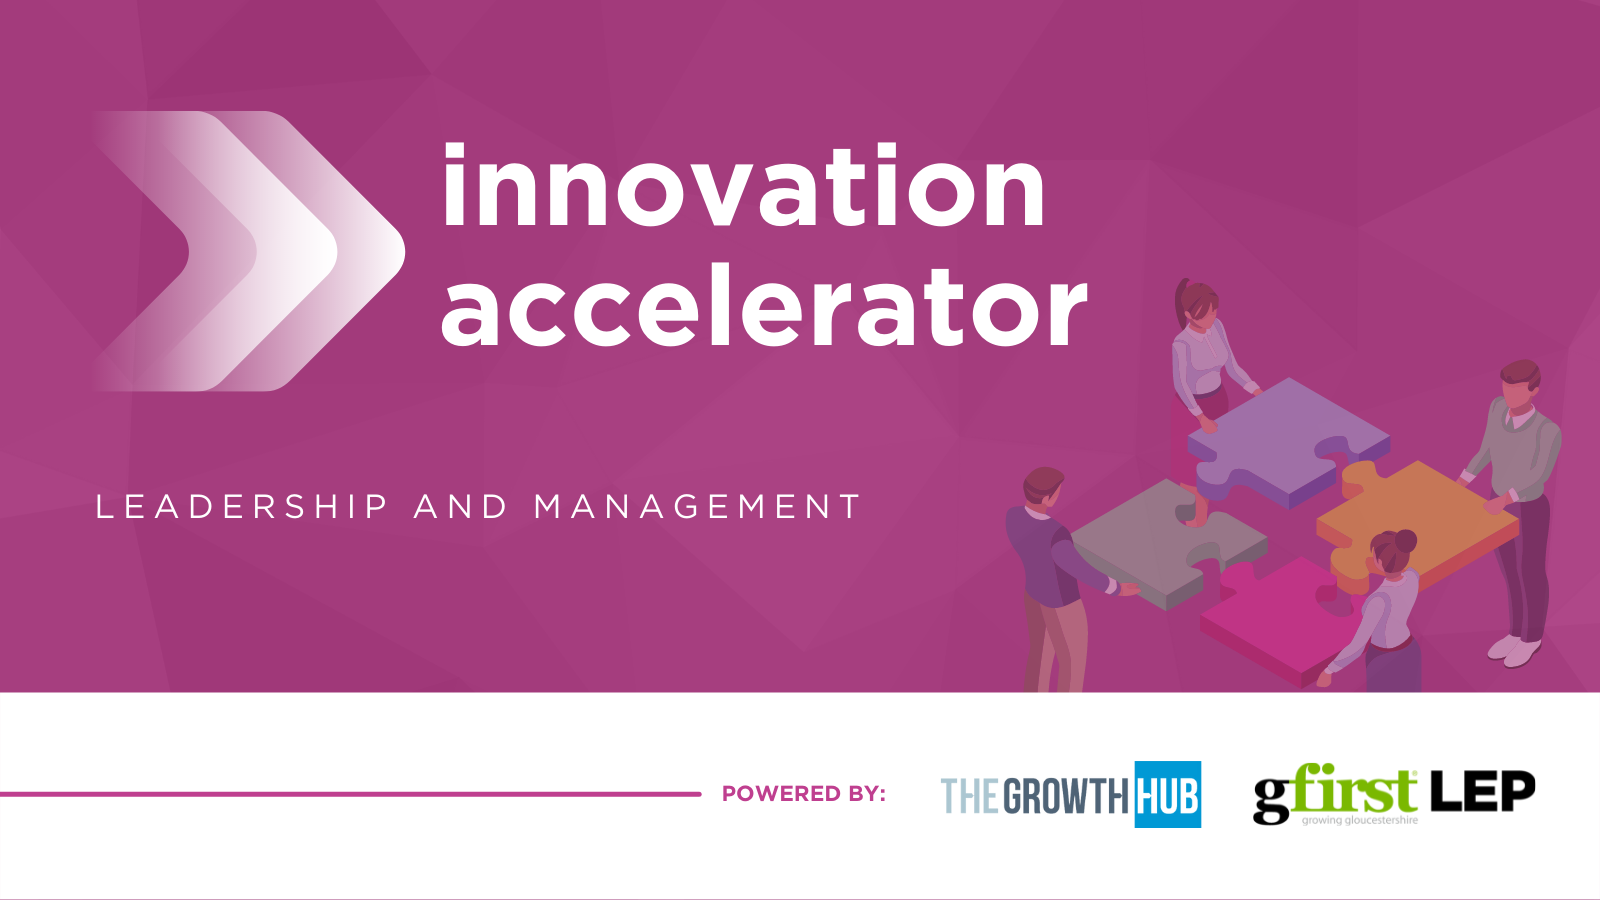 Innovation Accelerator equips business leaders with the skills to embed innovation and change management within the culture of their business, in order to deliver sustainable growth.